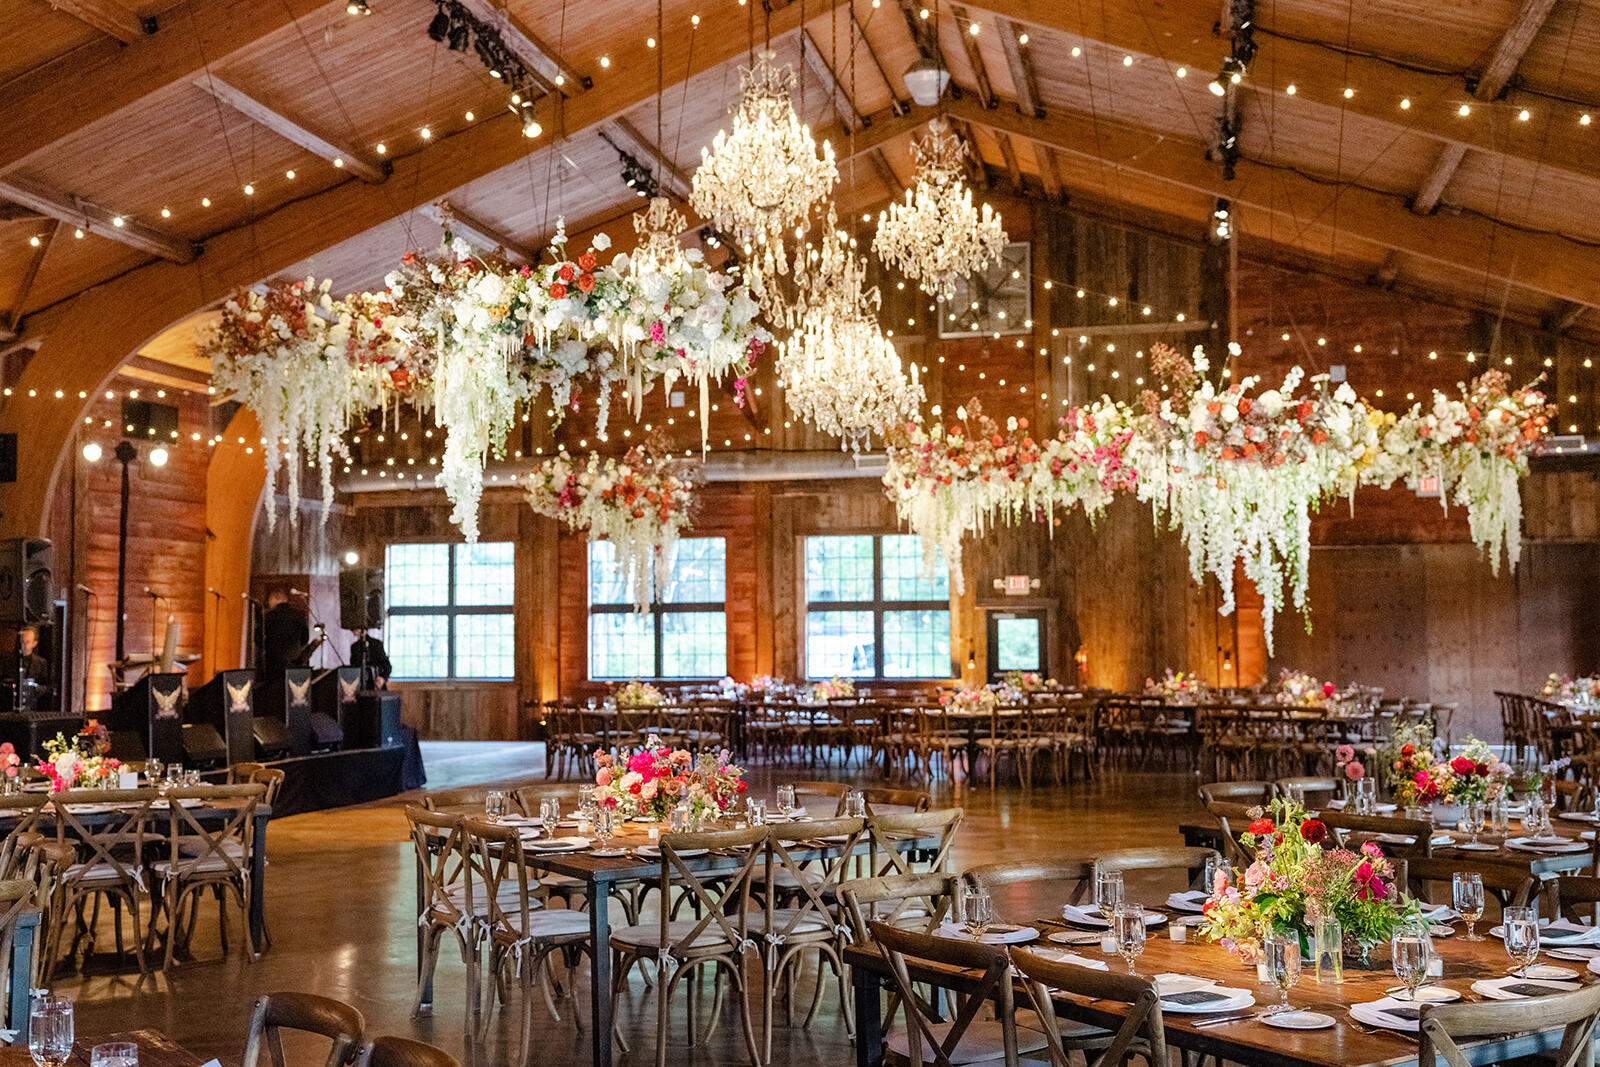 SEO for Wedding Venues: An indoor reception setup with chandeliers and hanging floral installations with wooden tables, chairs and flooring.